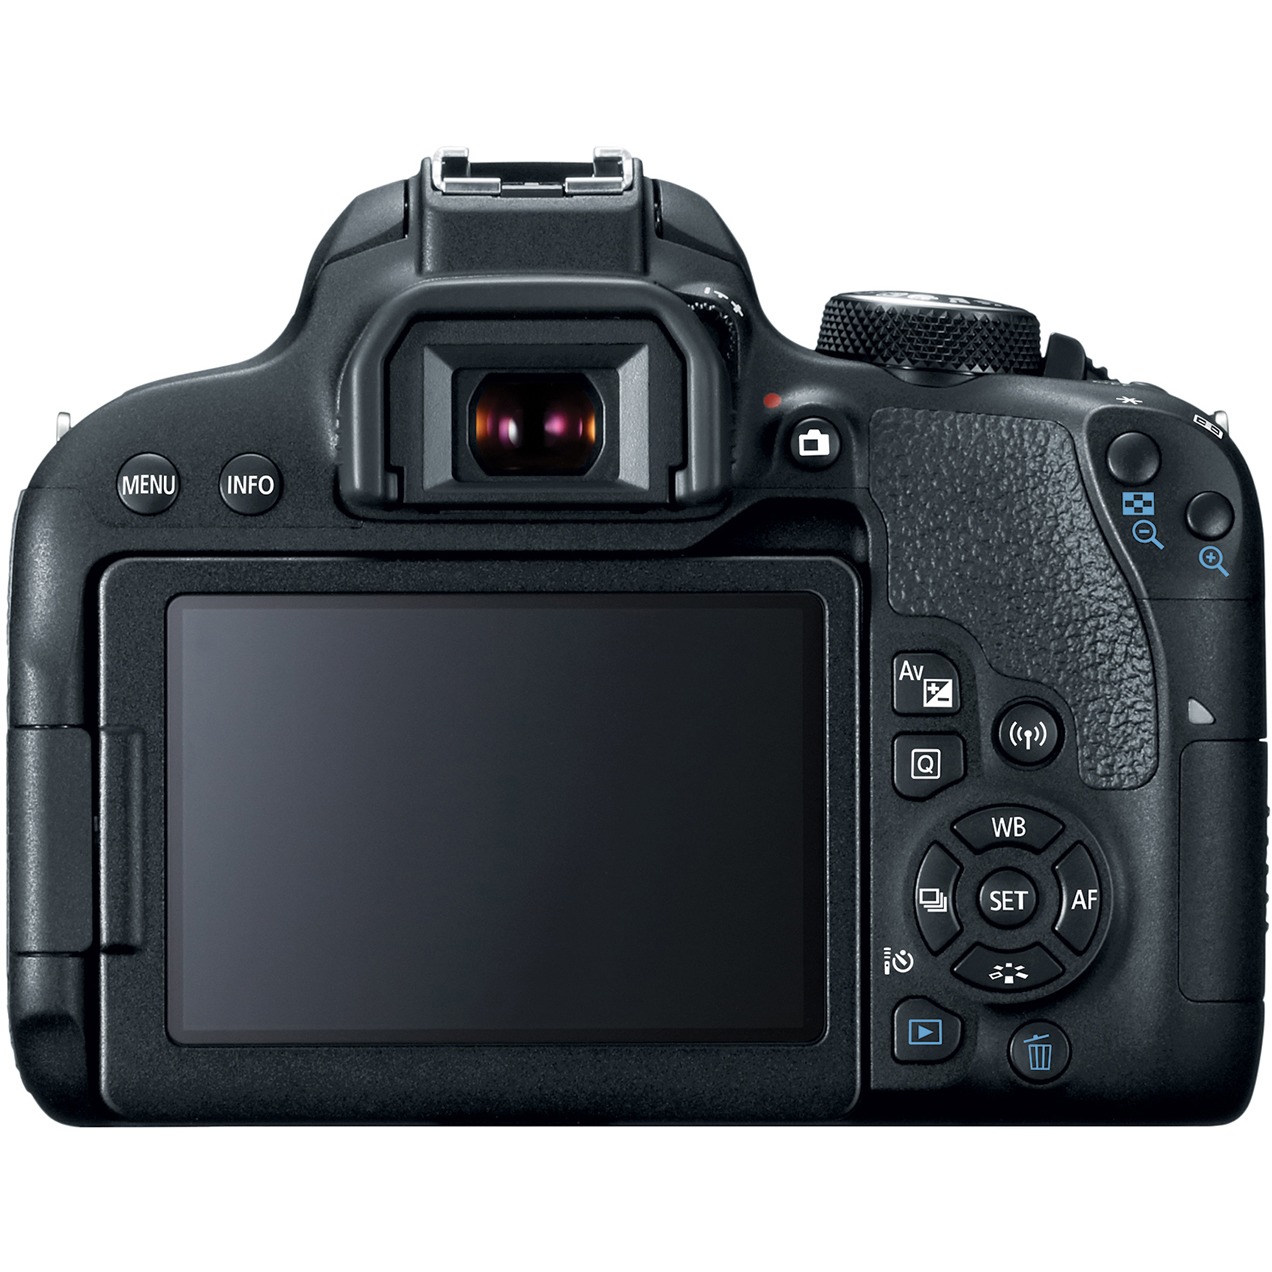 Canon EOS Rebel T7i DSLR Camera with 18-55mm Lens - image 5 of 10